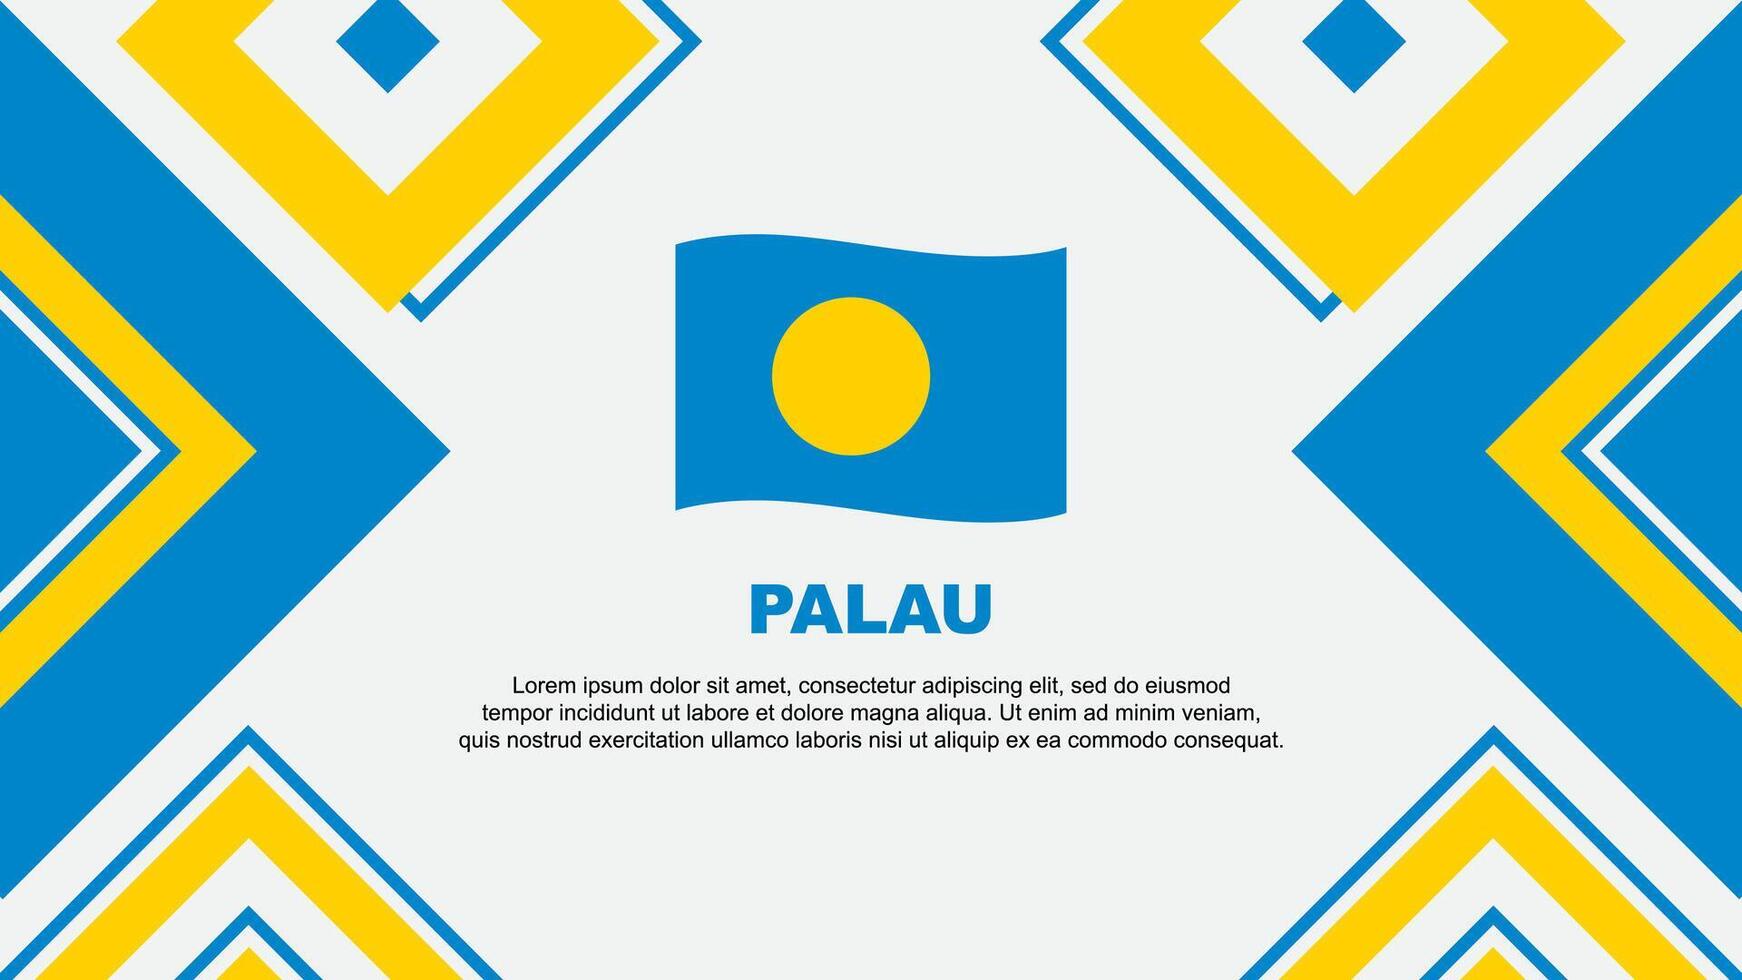 Palau Flag Abstract Background Design Template. Palau Independence Day Banner Wallpaper Vector Illustration. Palau Independence Day